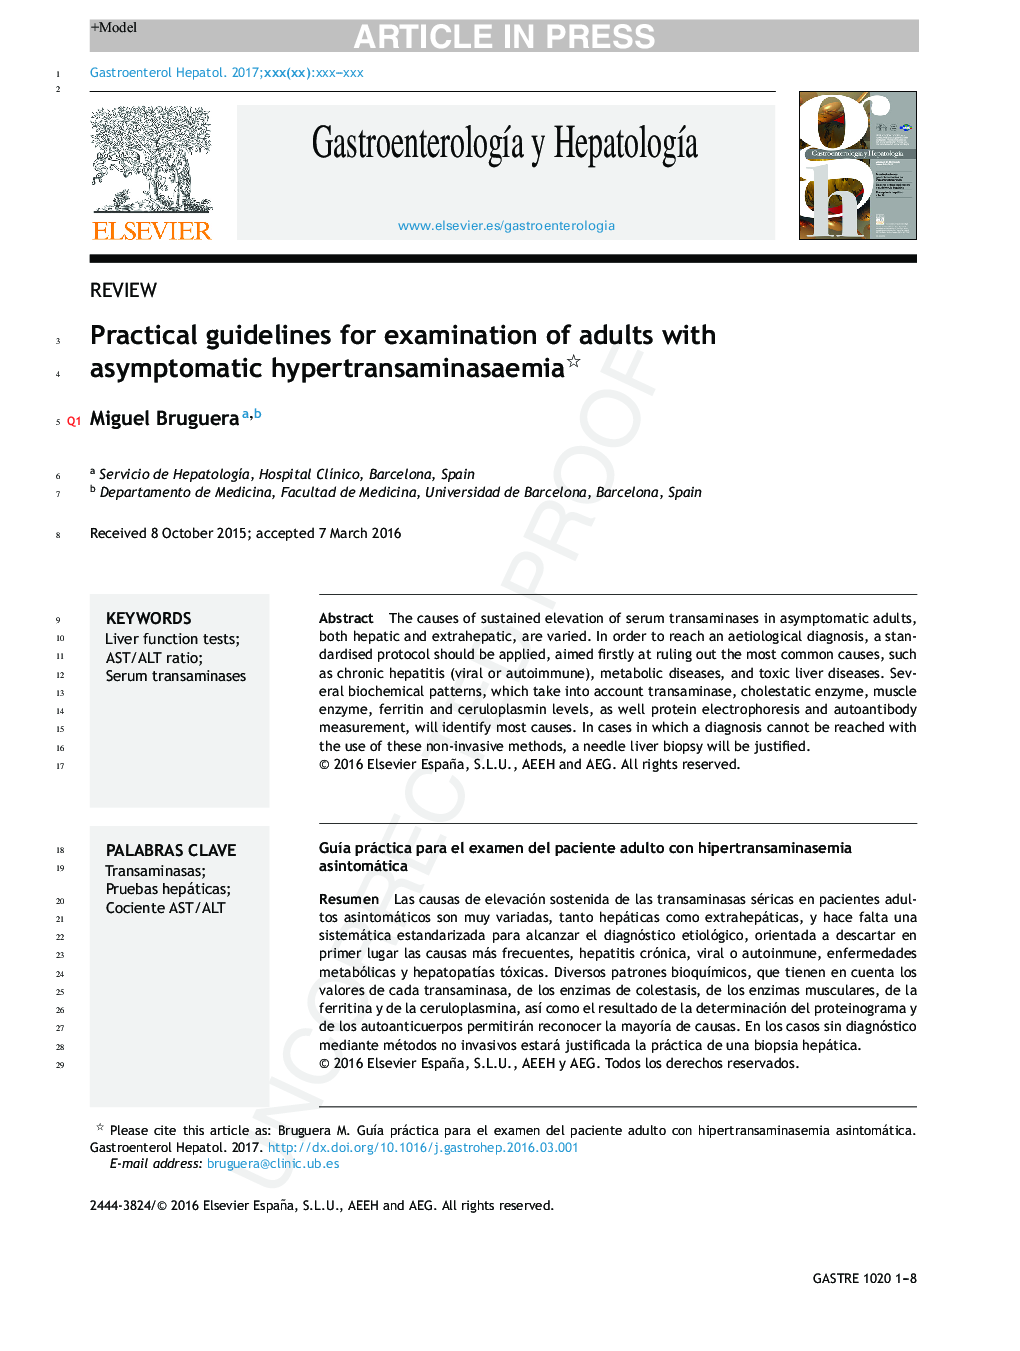 Practical guidelines for examination of adults with asymptomatic hypertransaminasaemia